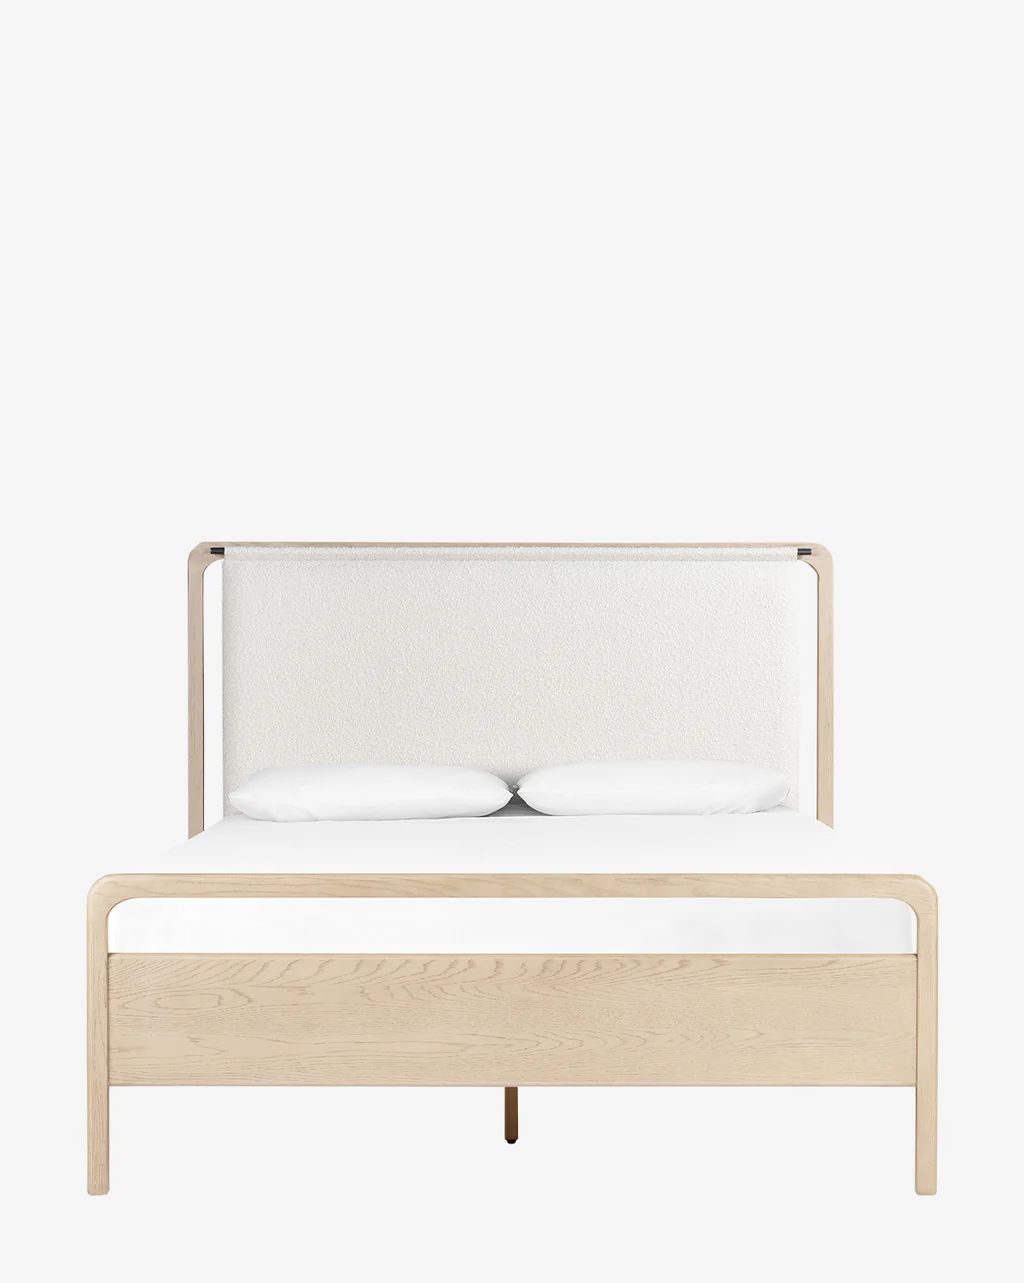 Hensley Bed | McGee & Co.